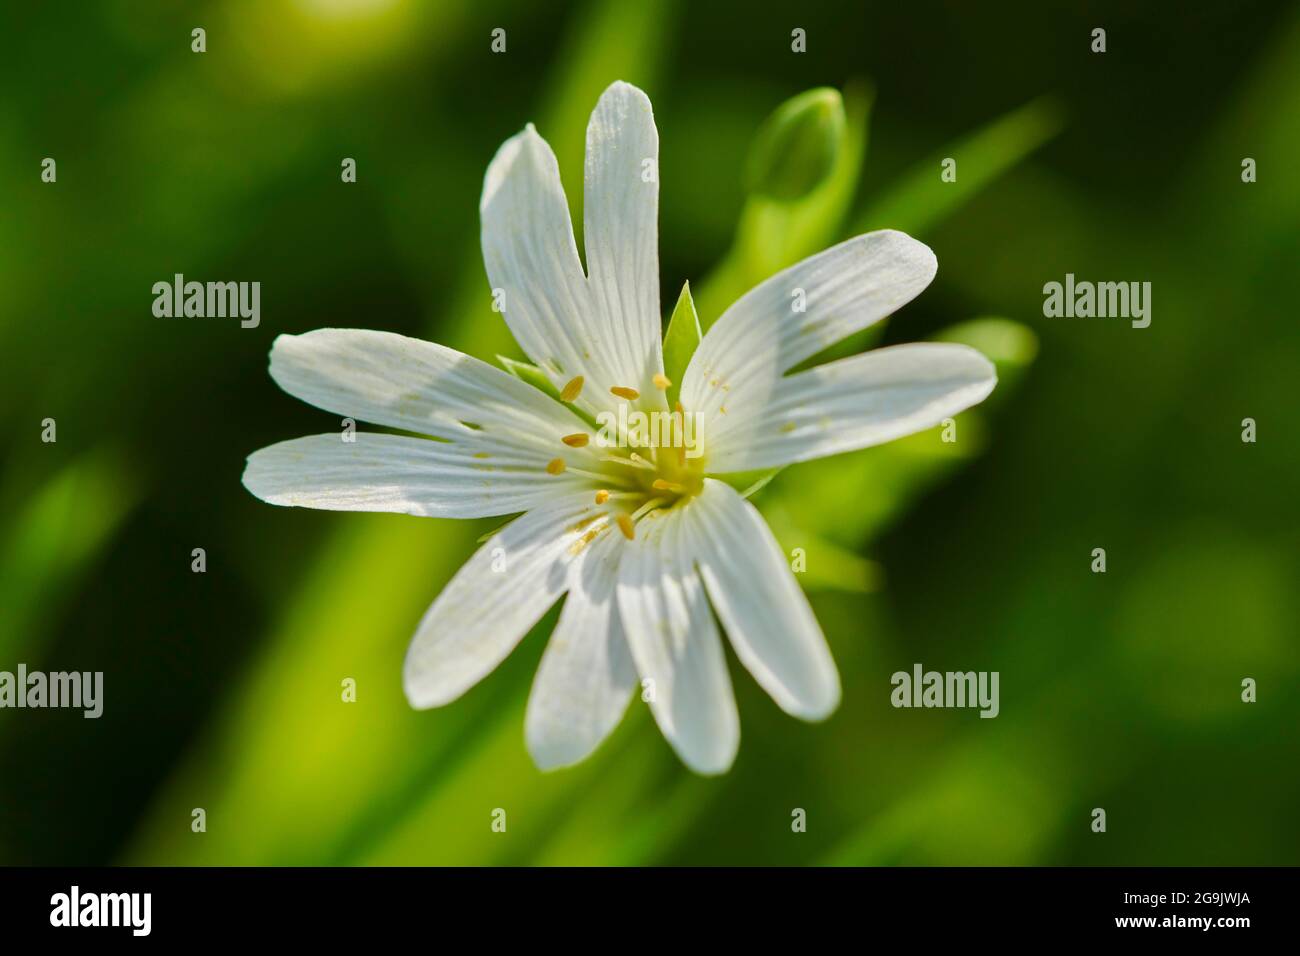 Starwort, stitchwort or chickweed (Stellaria holostea) blooming on a medaow, Bavaria, Germany Stock Photo